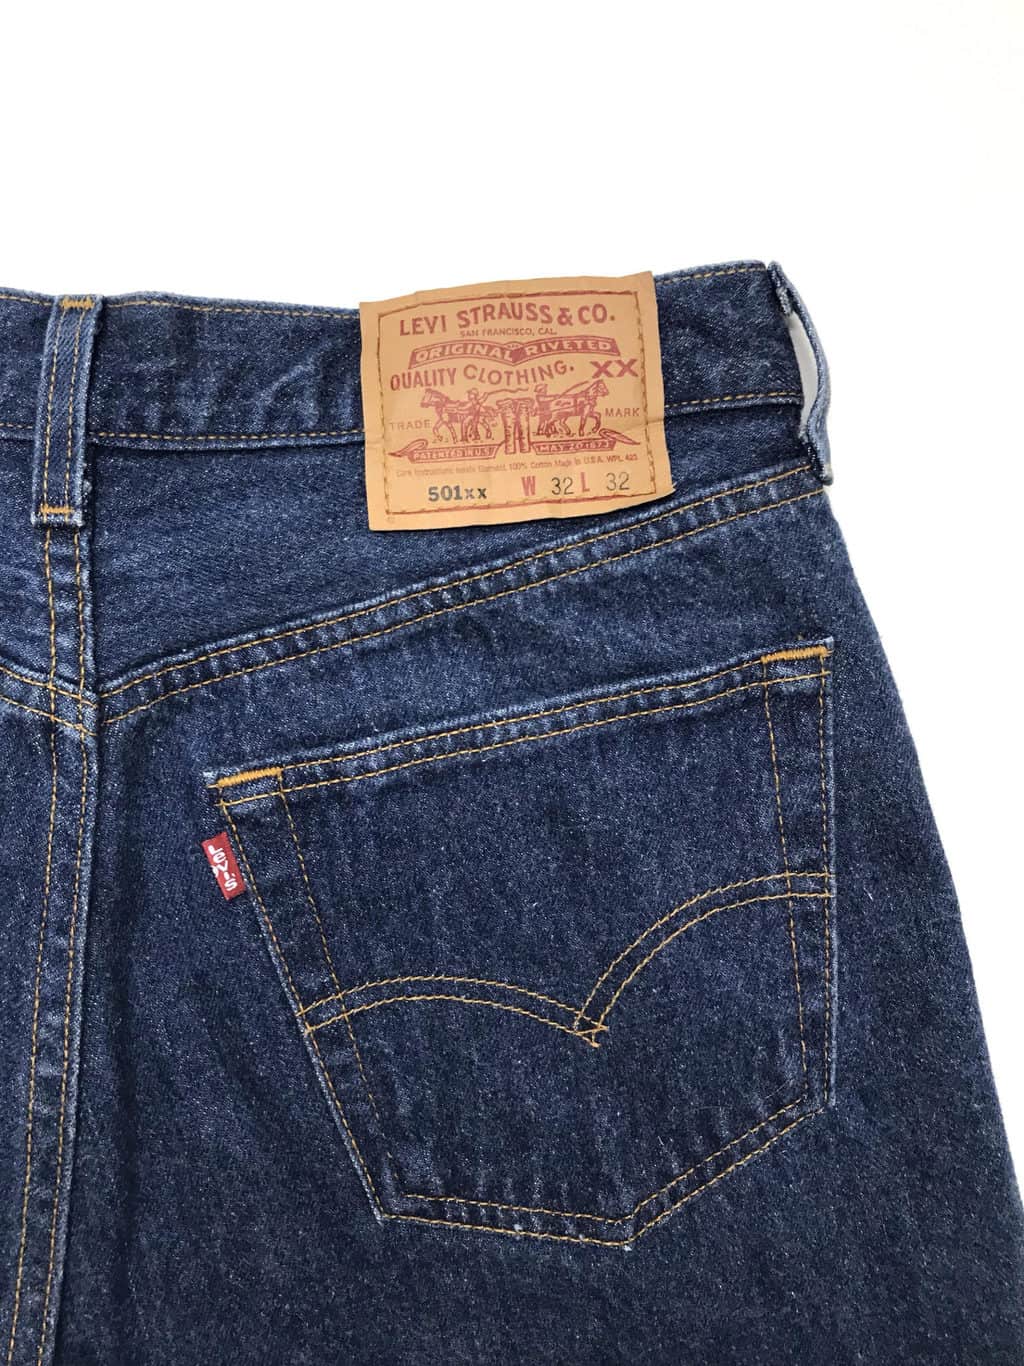 LEVIS Vintage Cut-Off 501xx Shorts in 